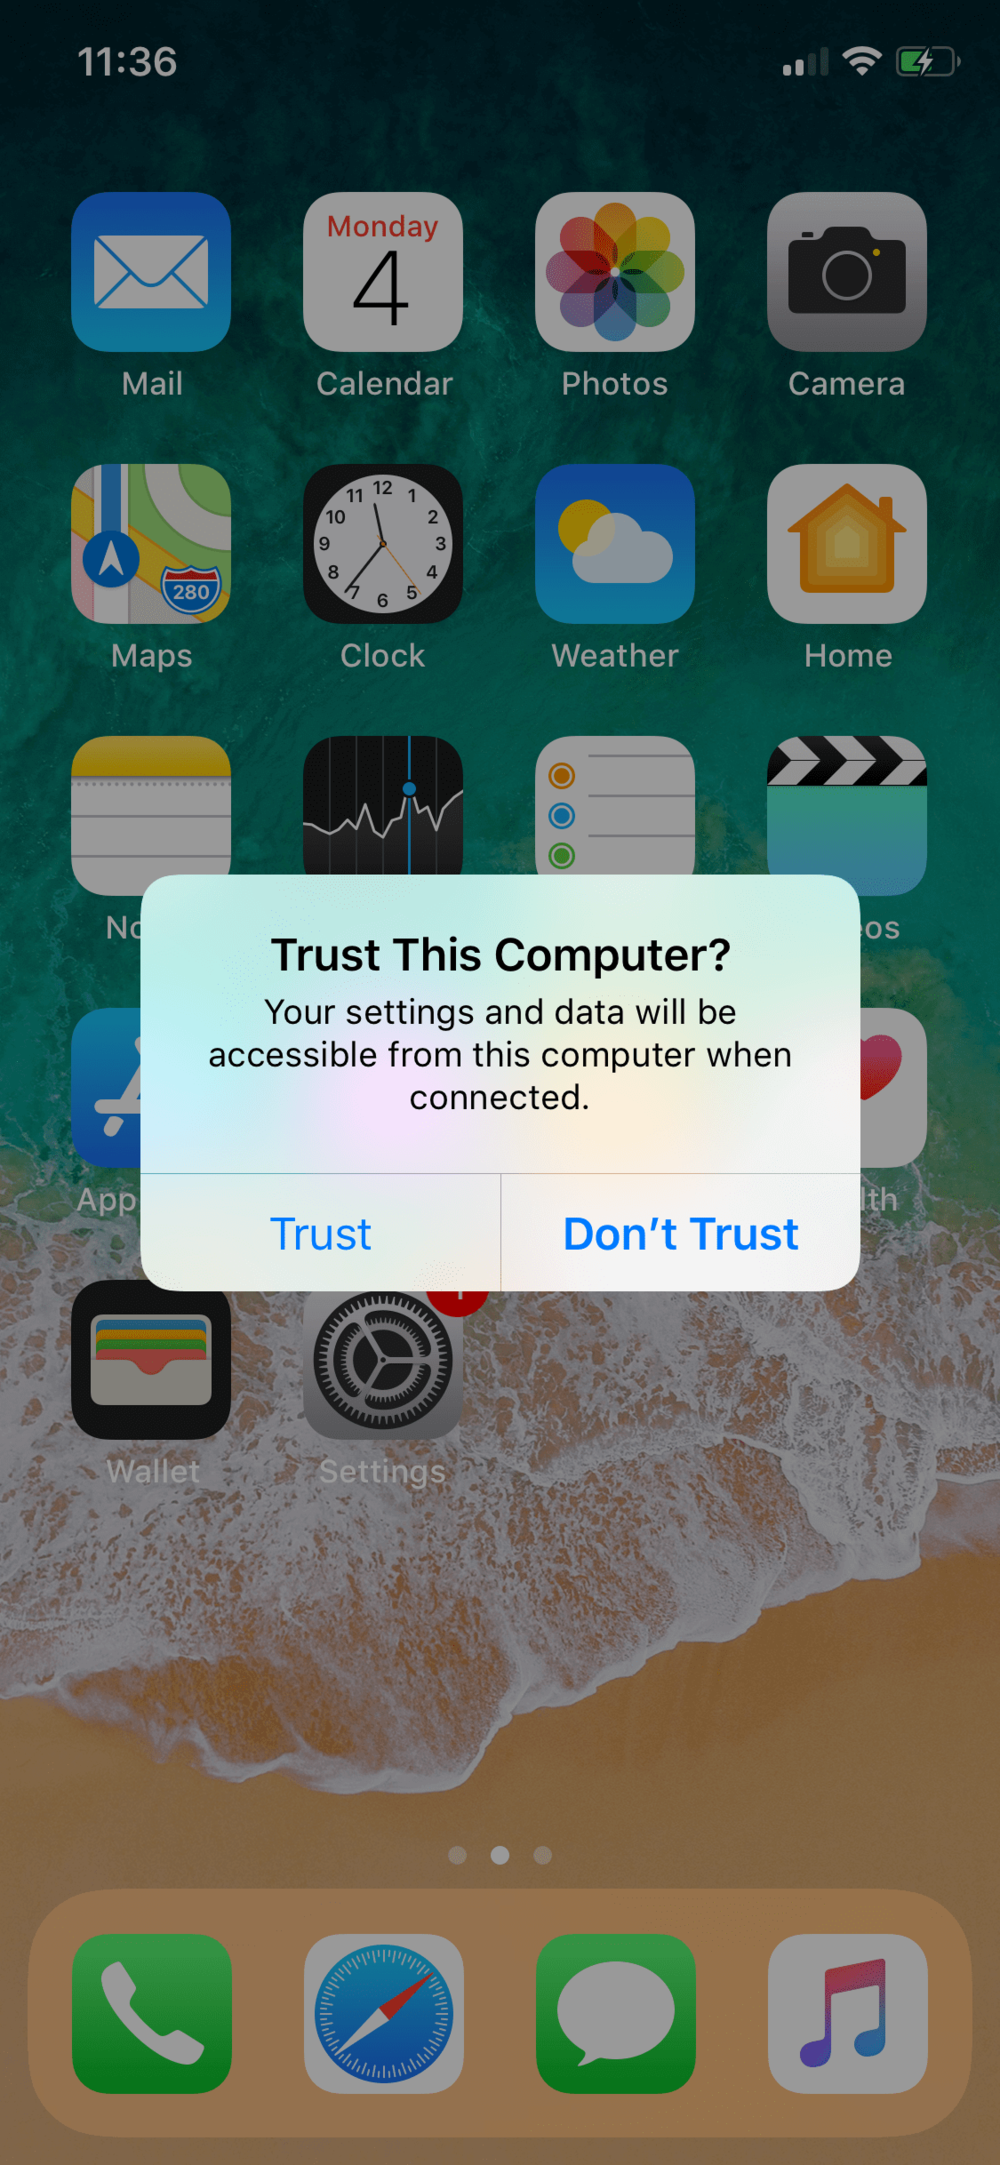 Select “Trust” to begin the screen mirroring process.